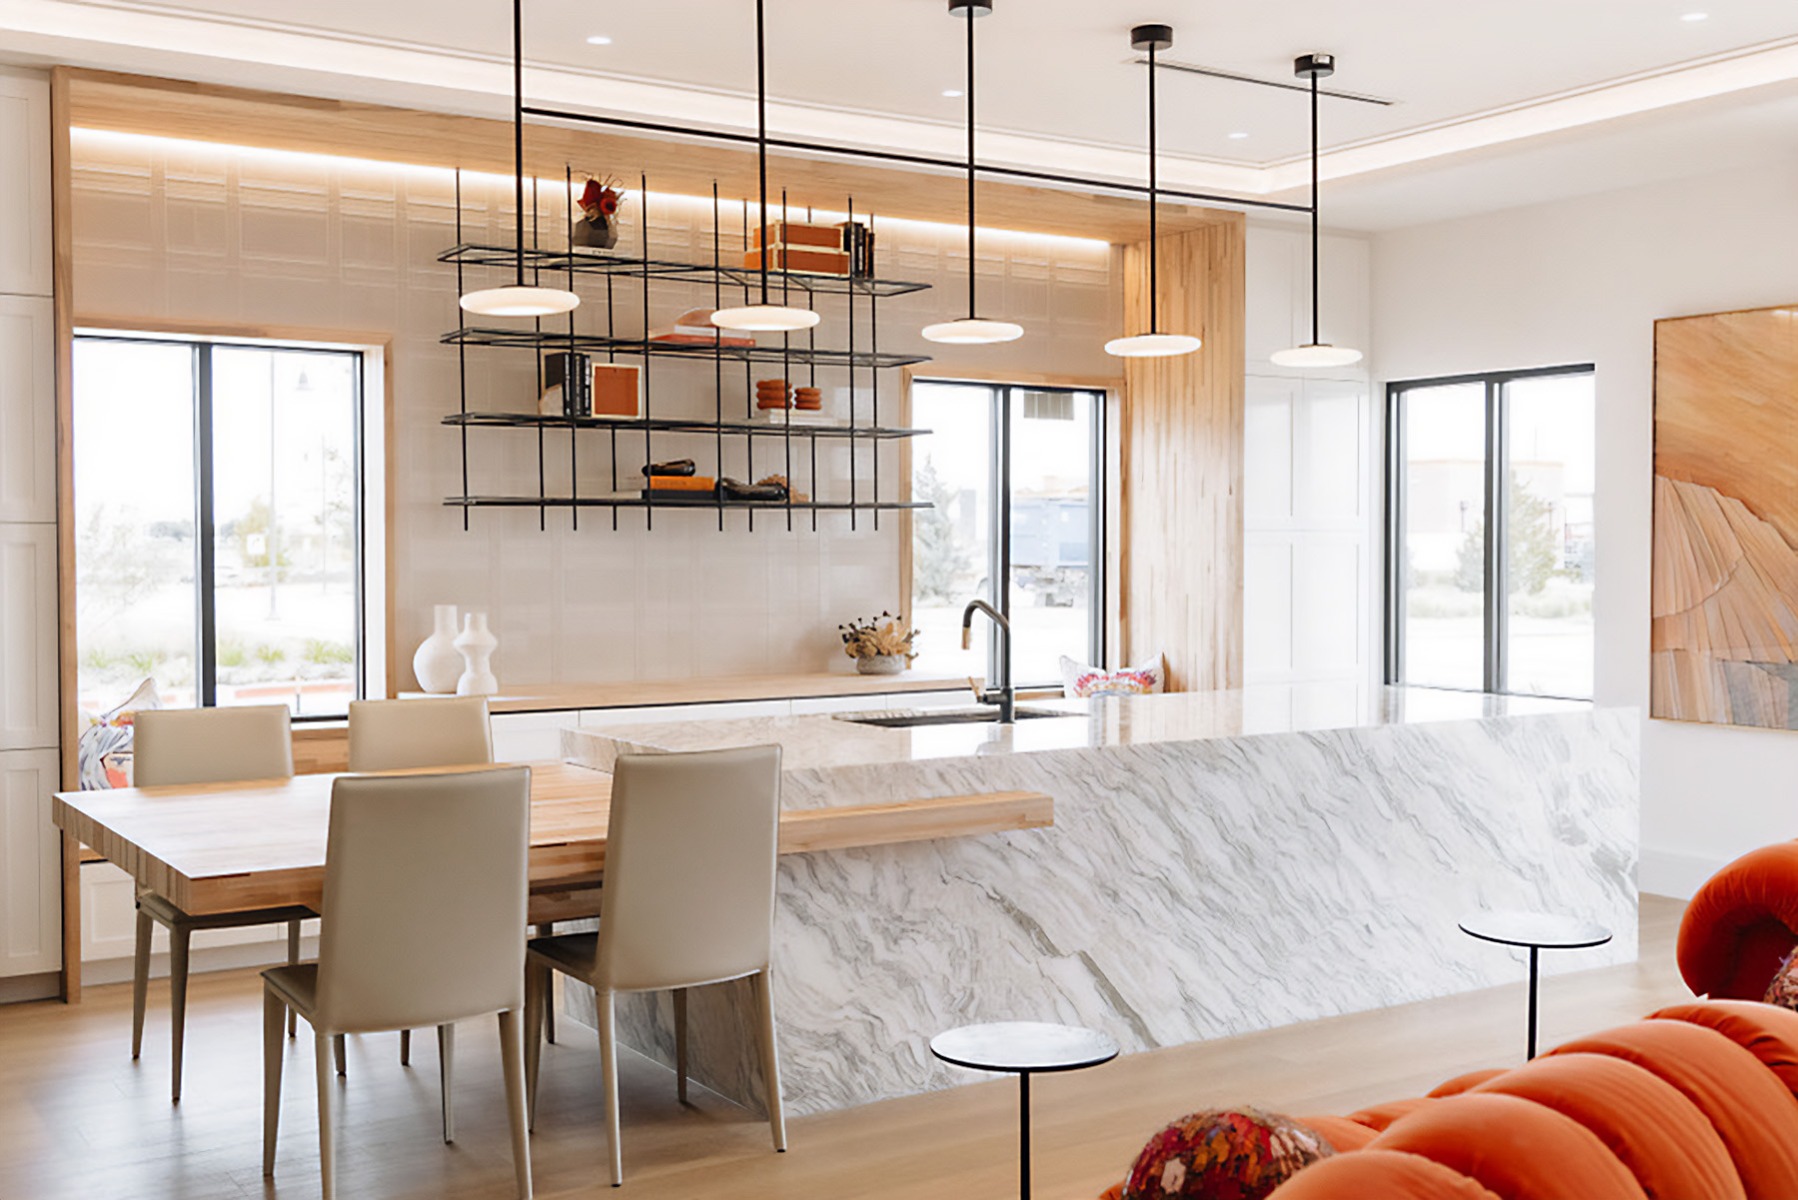 Nuance Interiors' lighting specifier Kelsi Lamberth used three types of Alcon Lighting fixtures at HBHQ: a 1-inch linear recessed light, a recessed wall wash light and a round recessed light